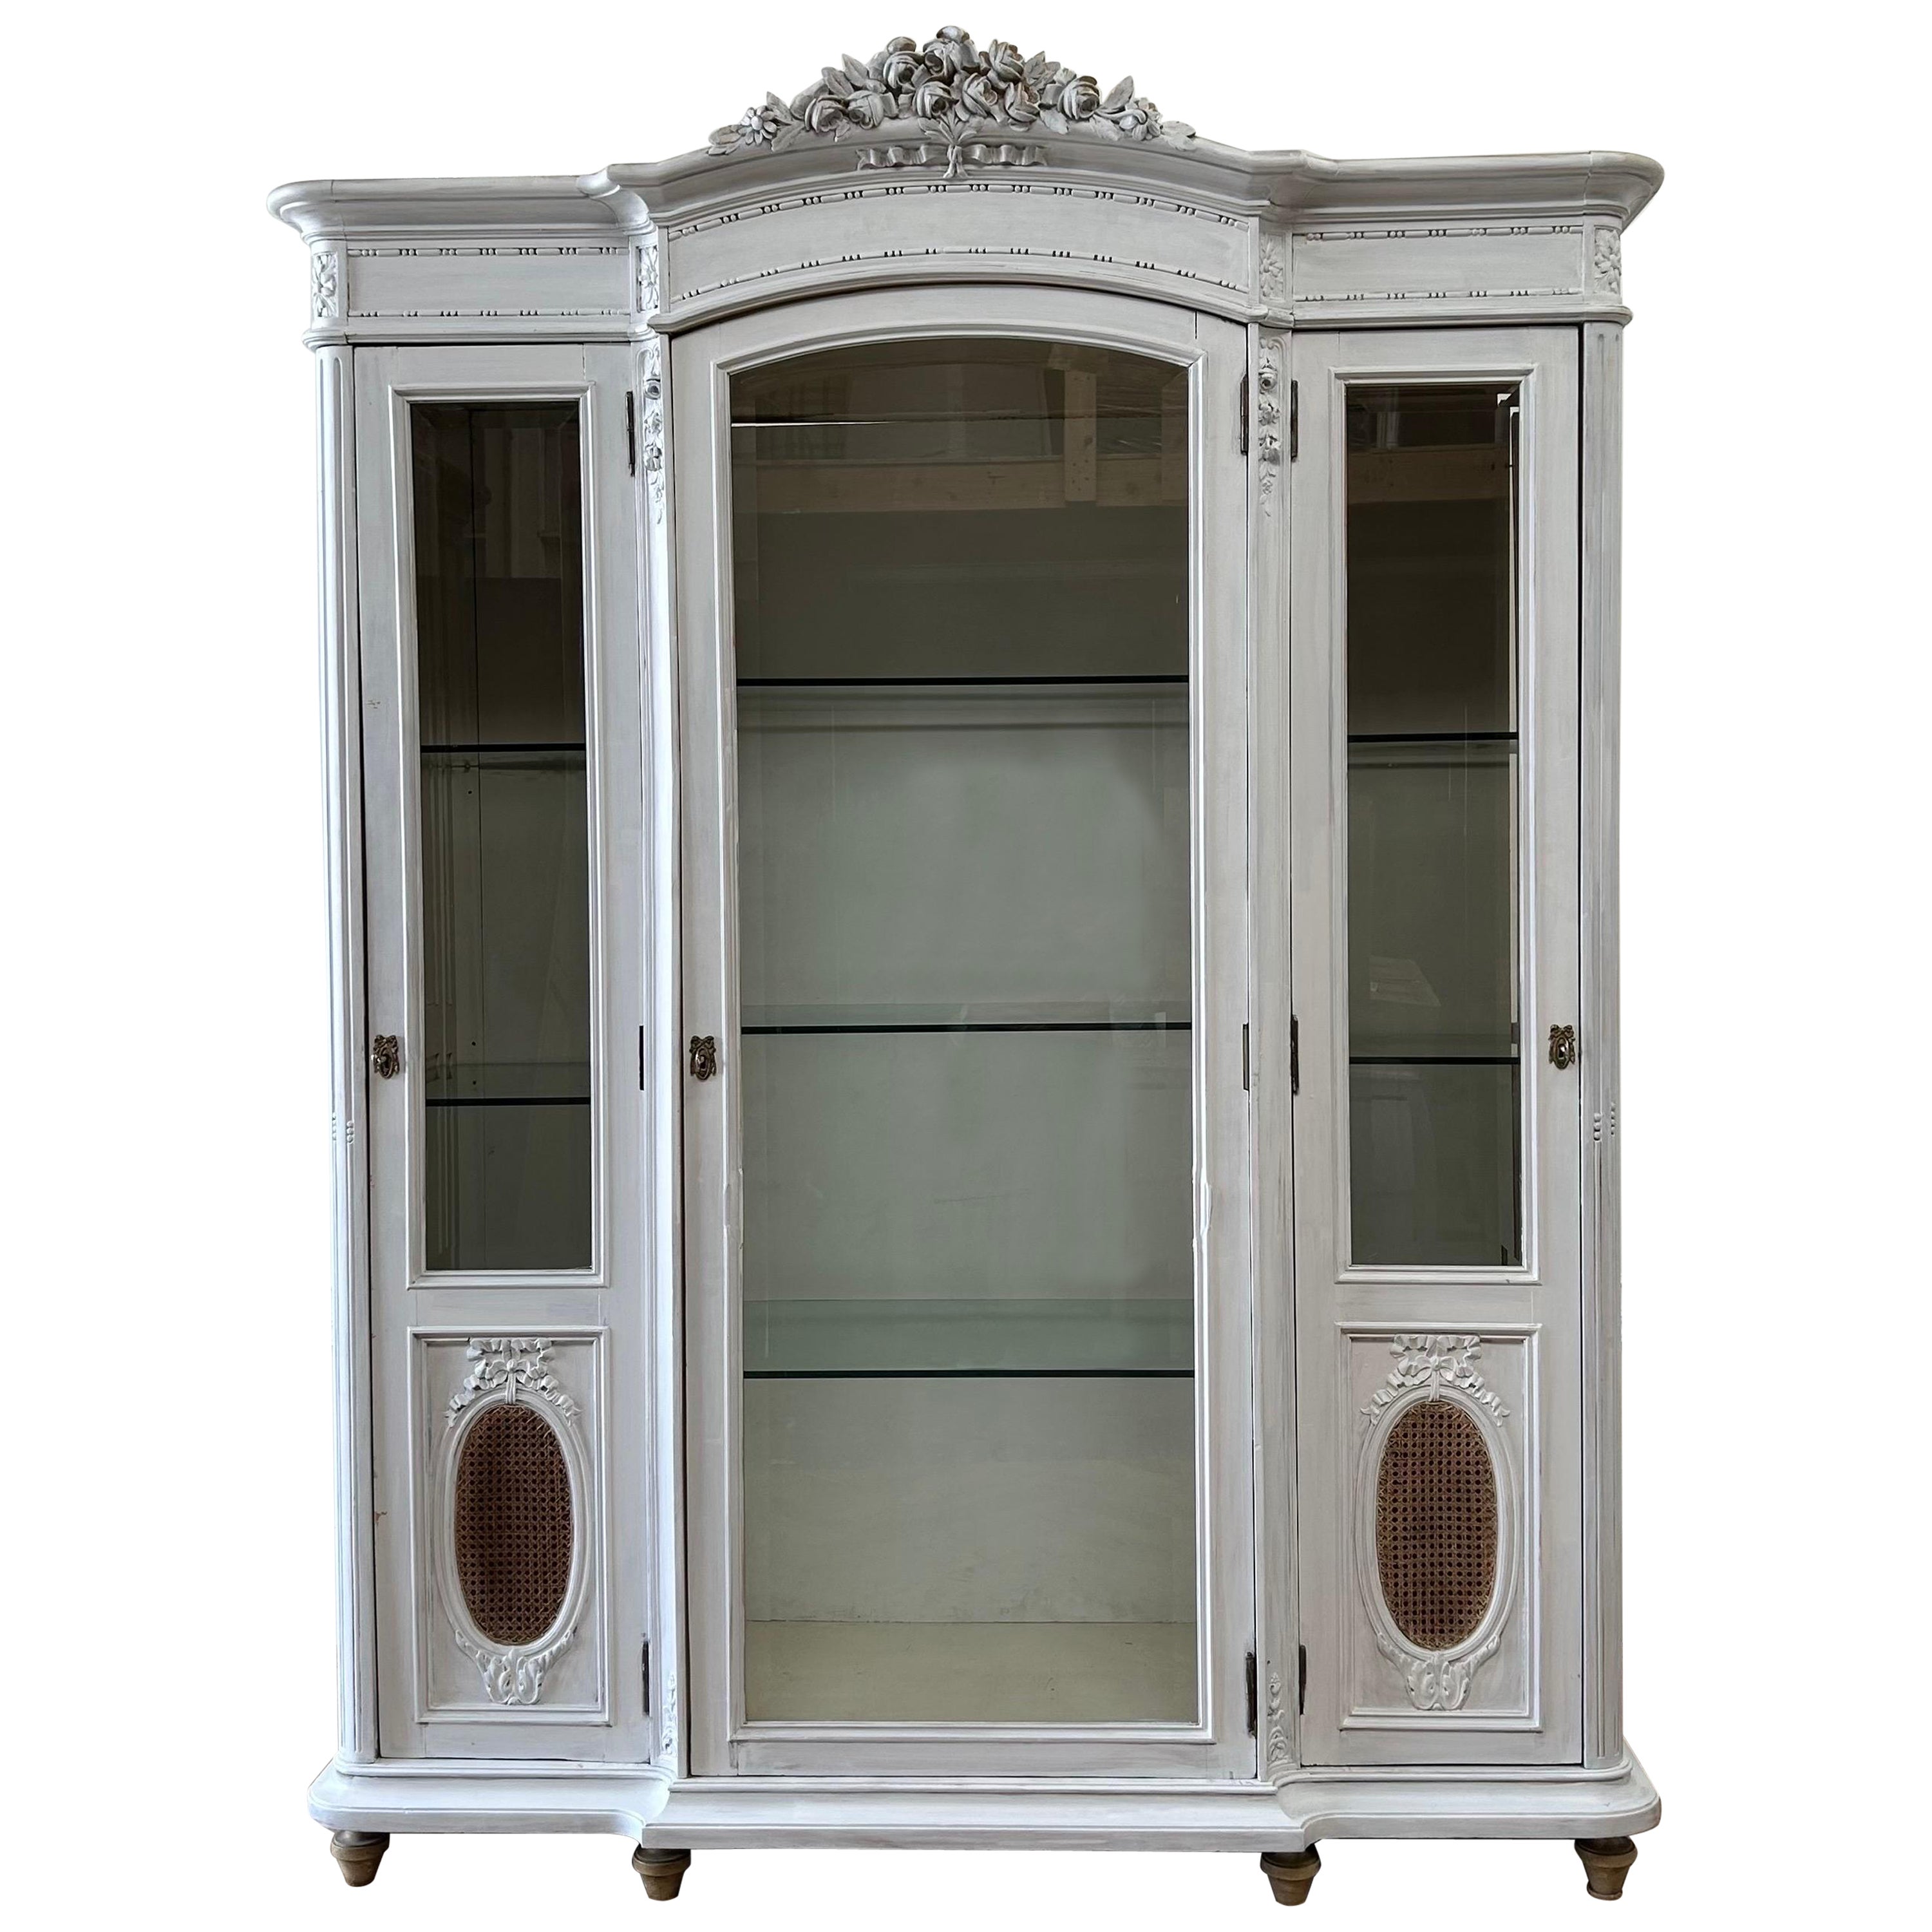 Vintage French Style Display Armoire in Painted White Finish